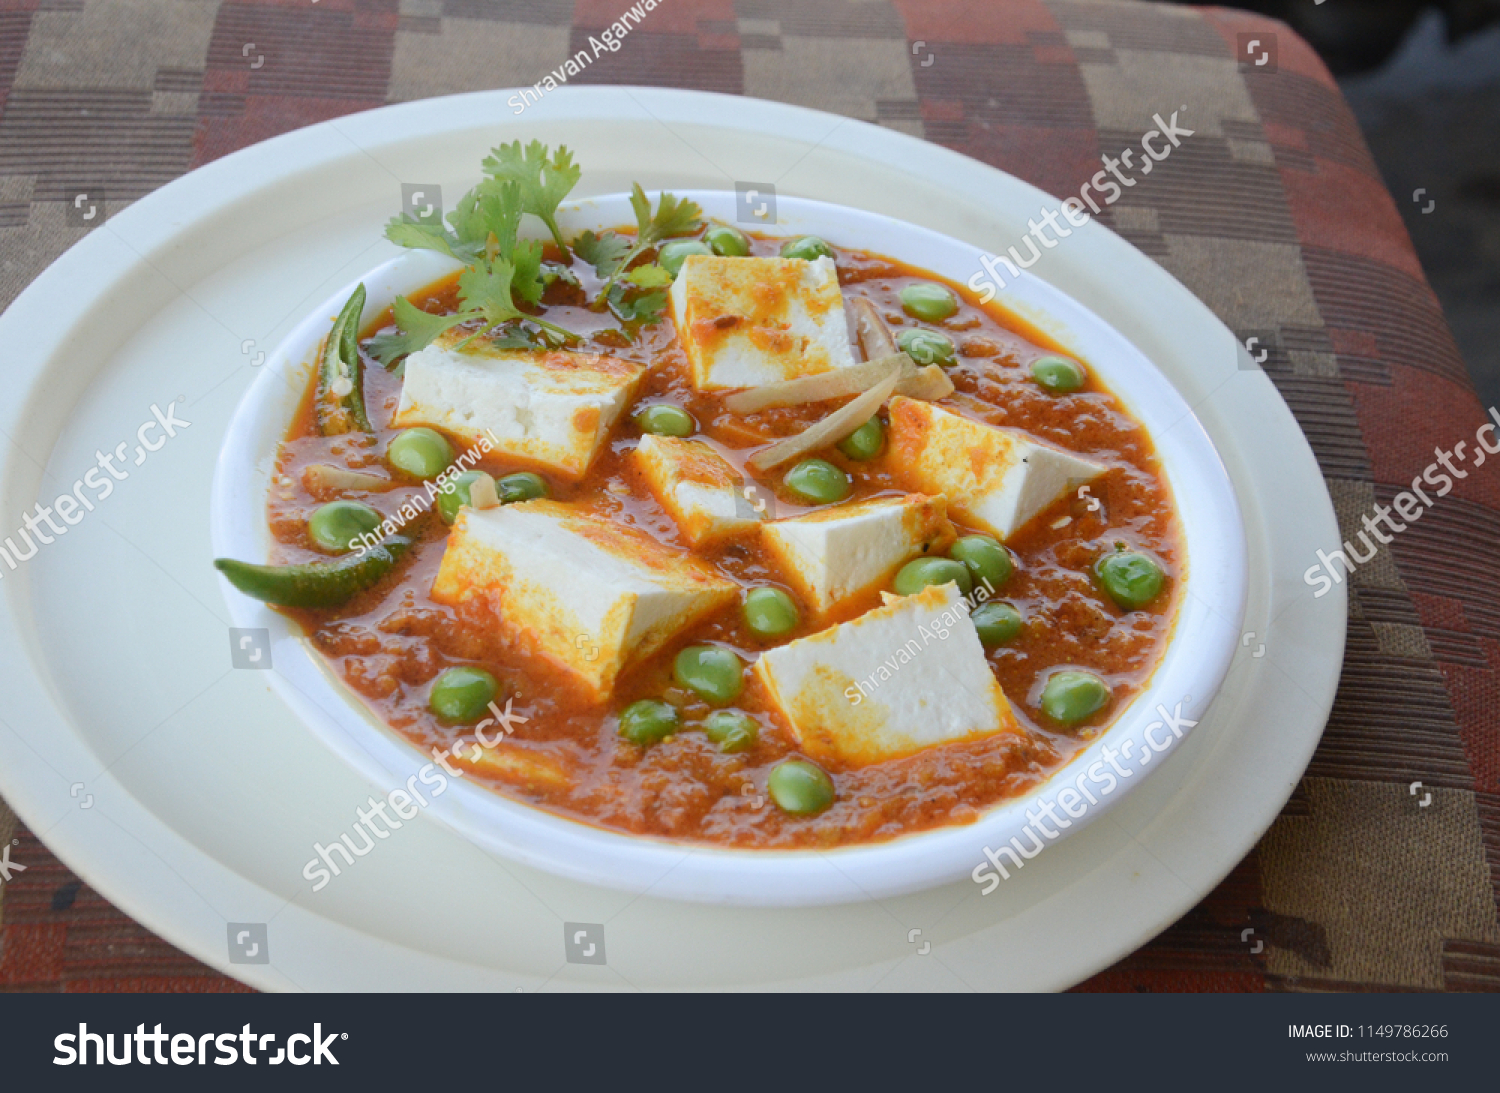 cheese, vegetable dish,cheese and peas #1149786266